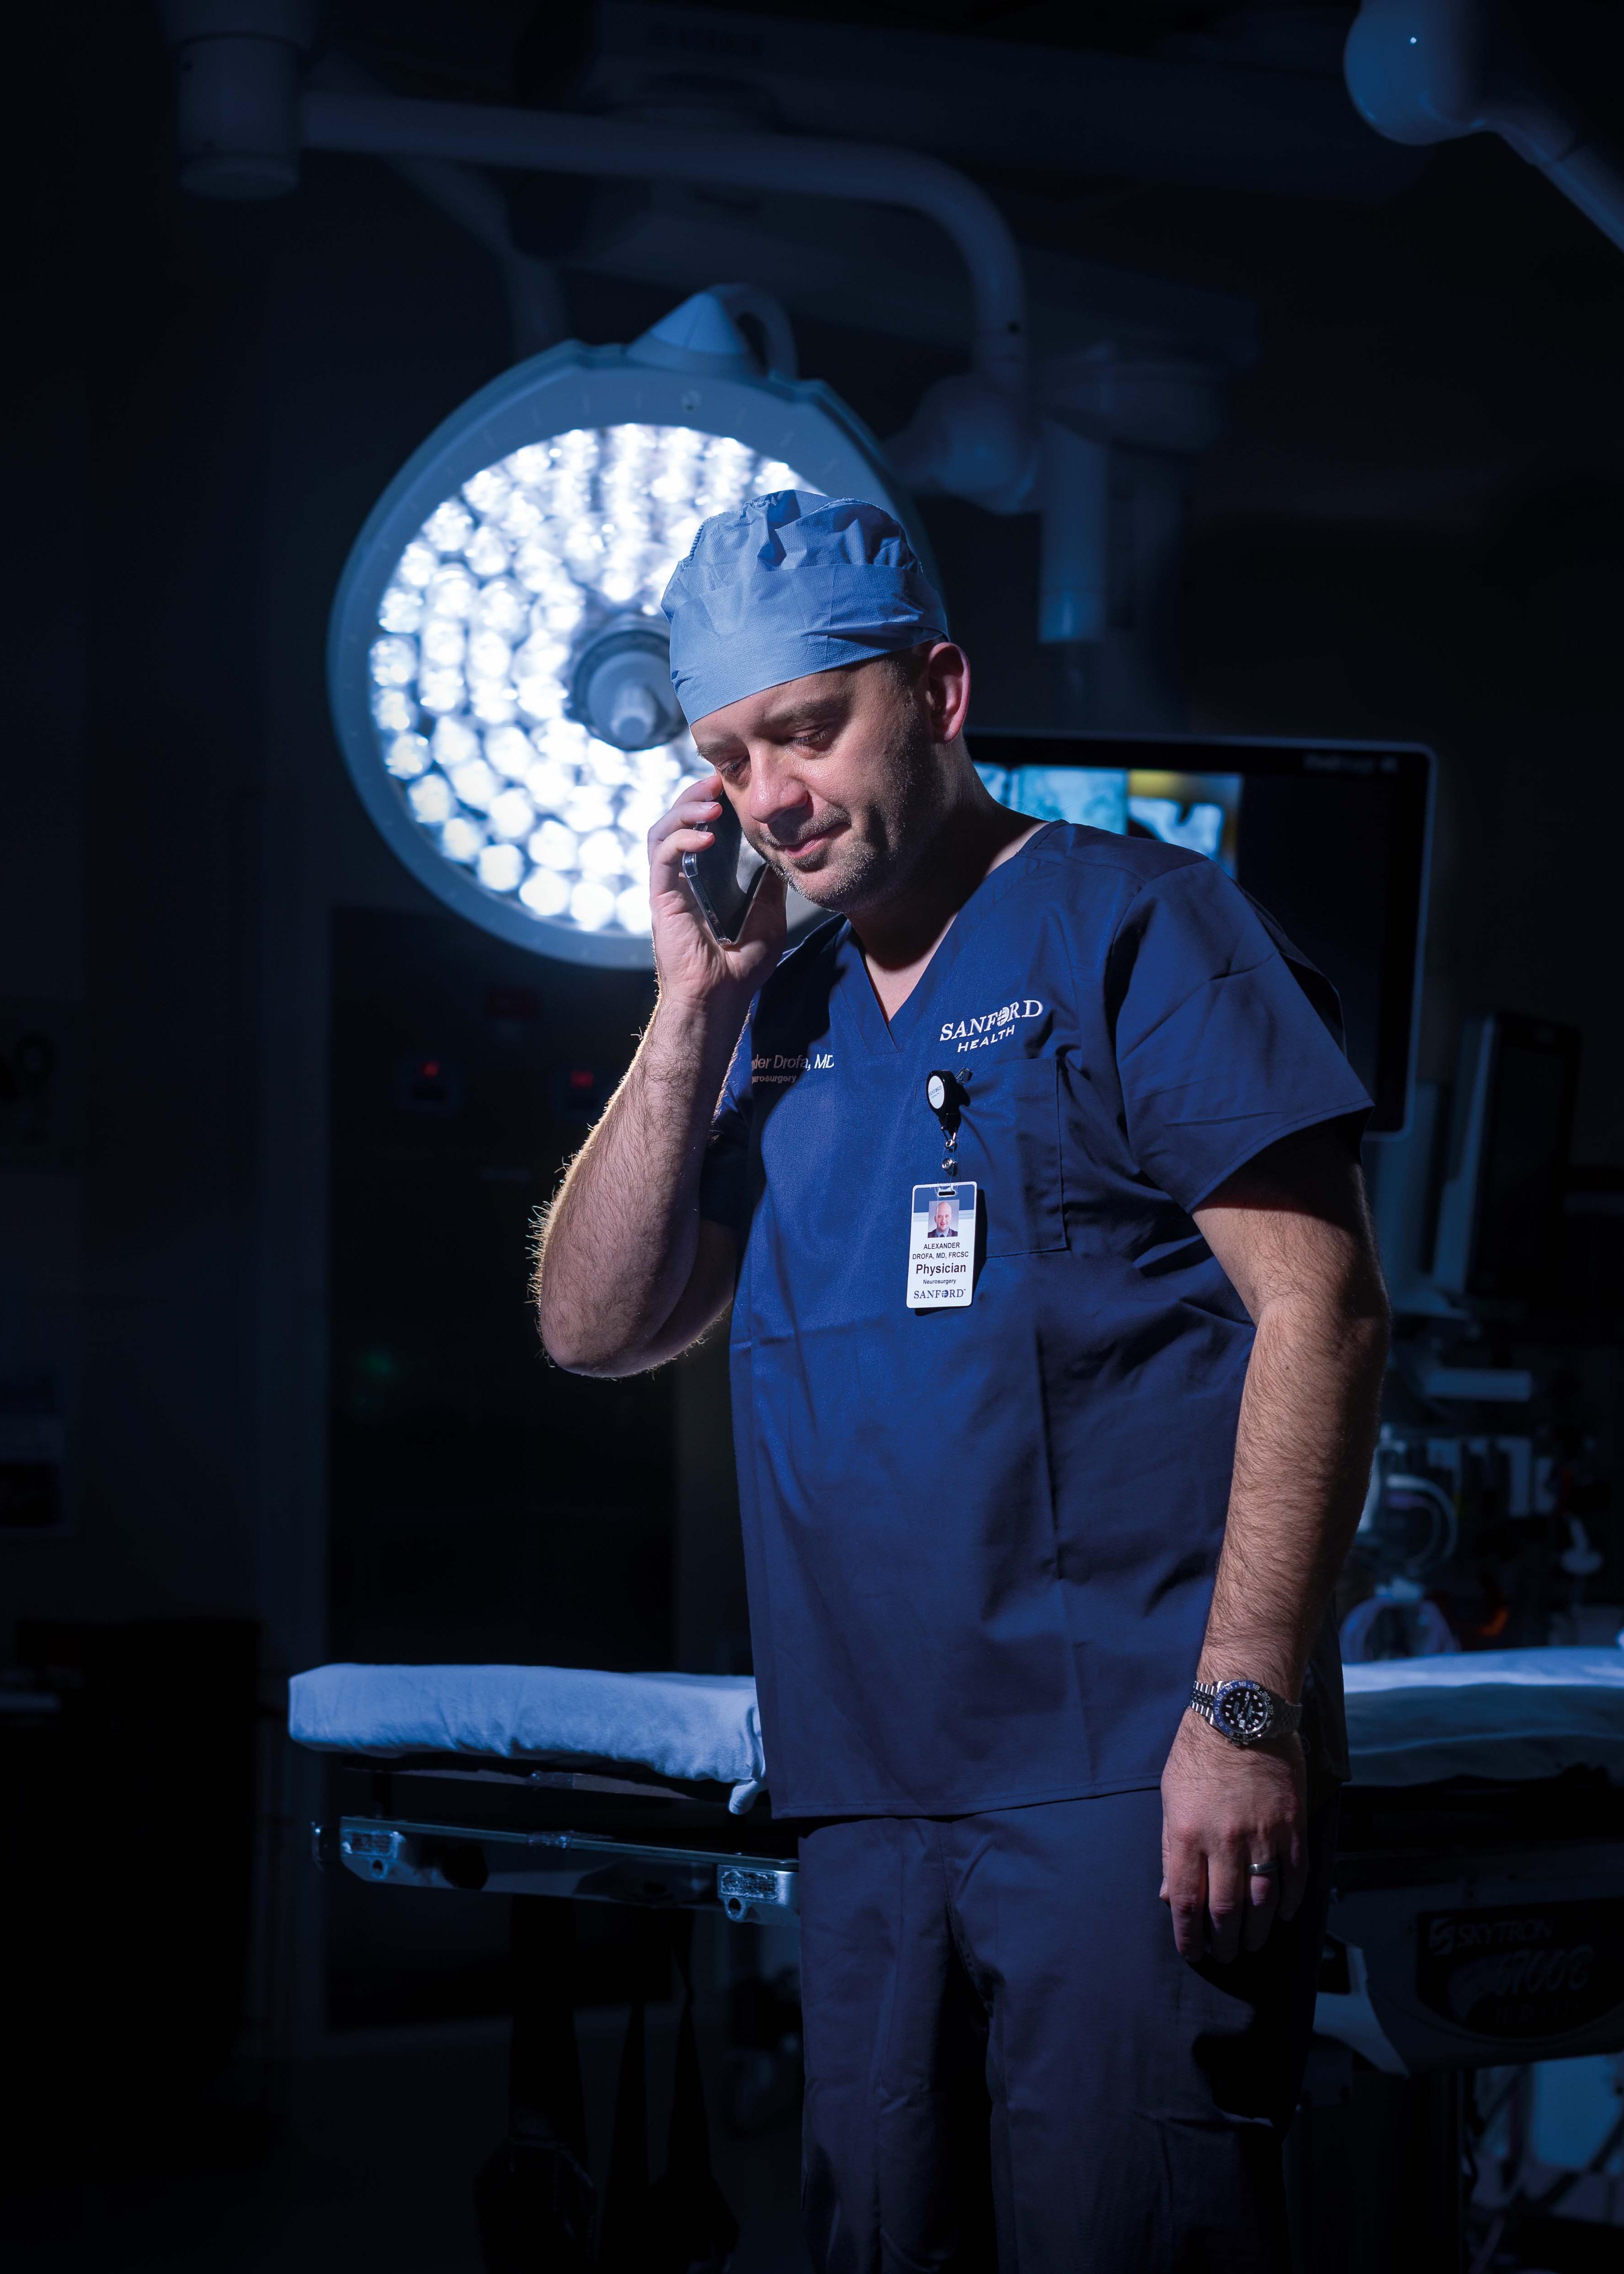 Dr. Drofa takes a call from the operating room